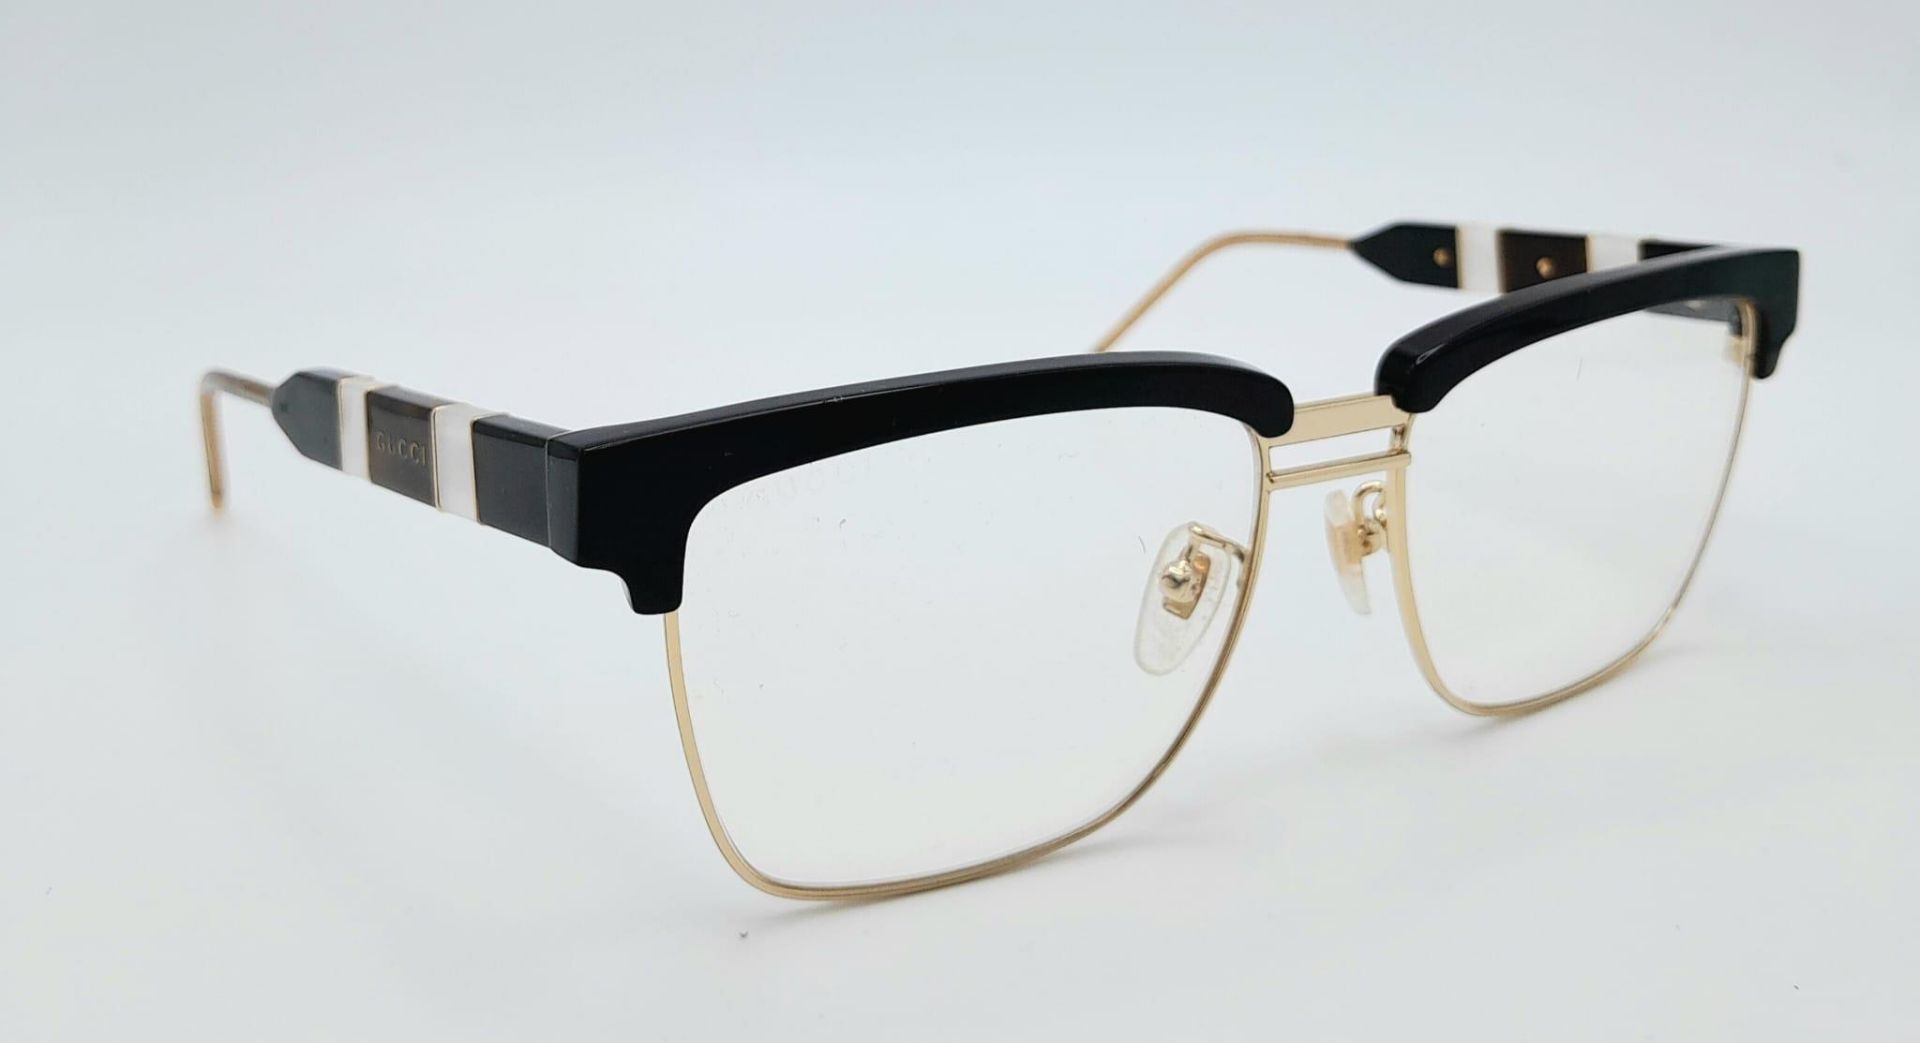 A GUCCI pair of glasses, gold plated in parts with mother of pearl highlights. Very stylish! - Image 5 of 5